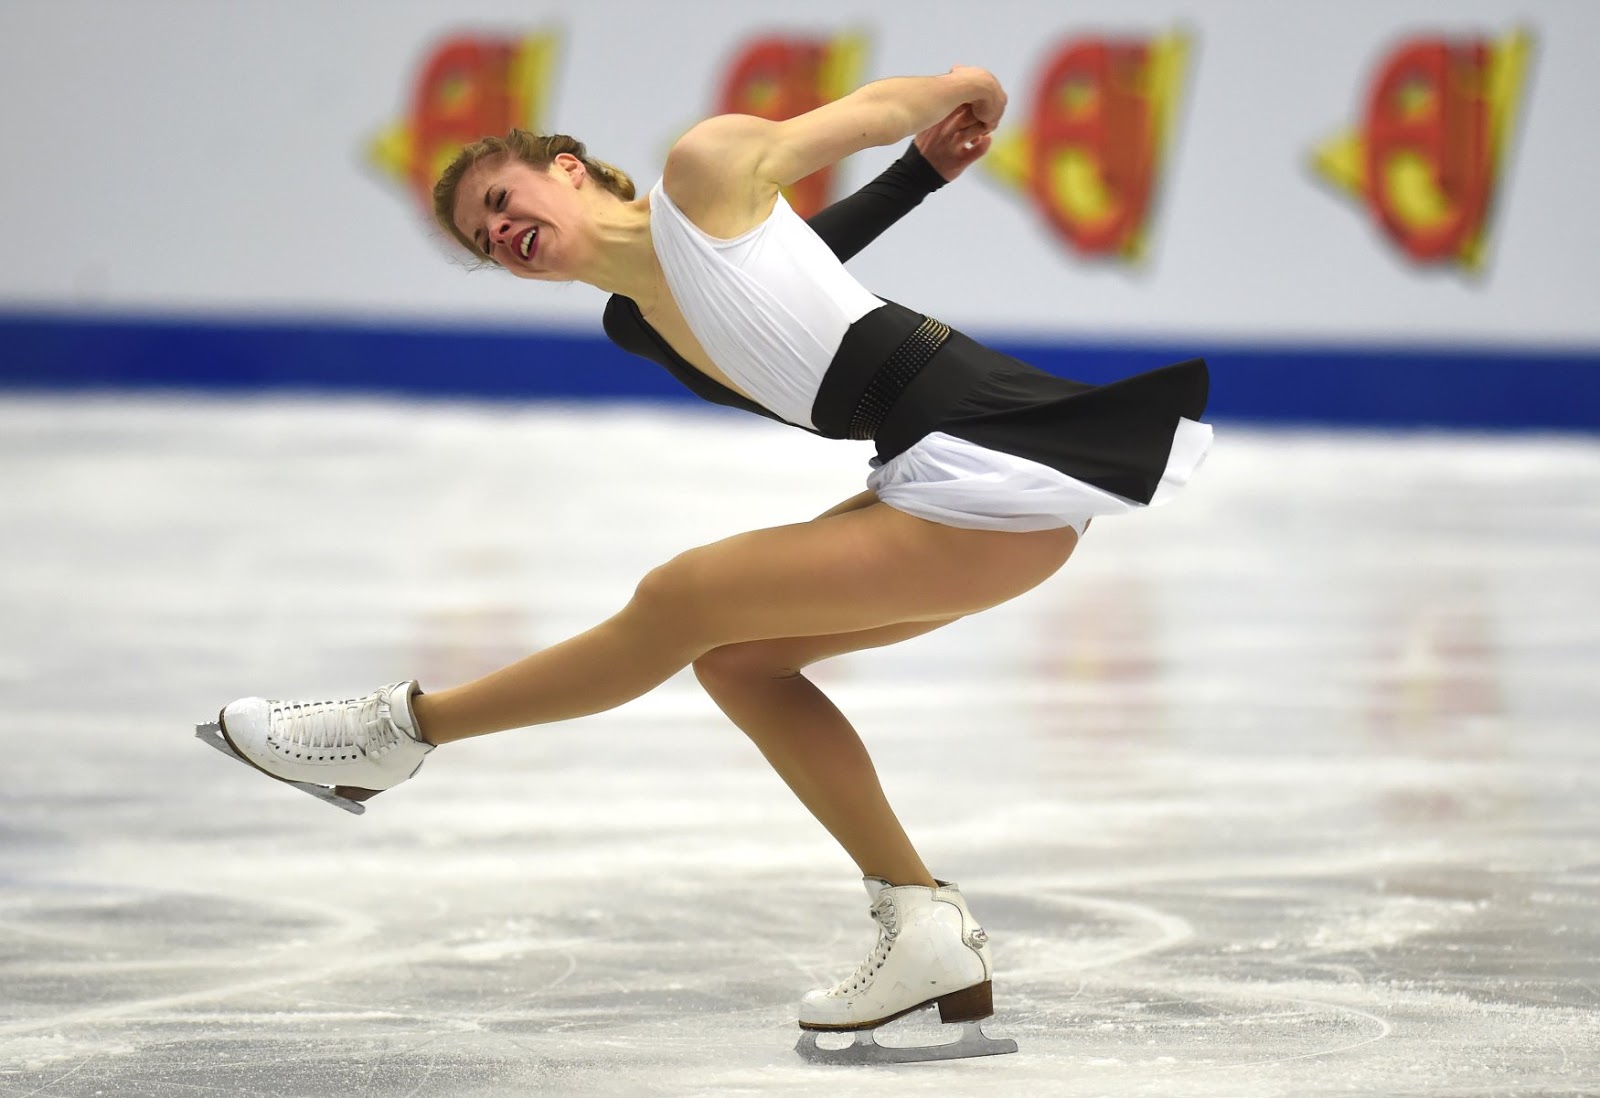 The Best Moments from the European Figure Skating 